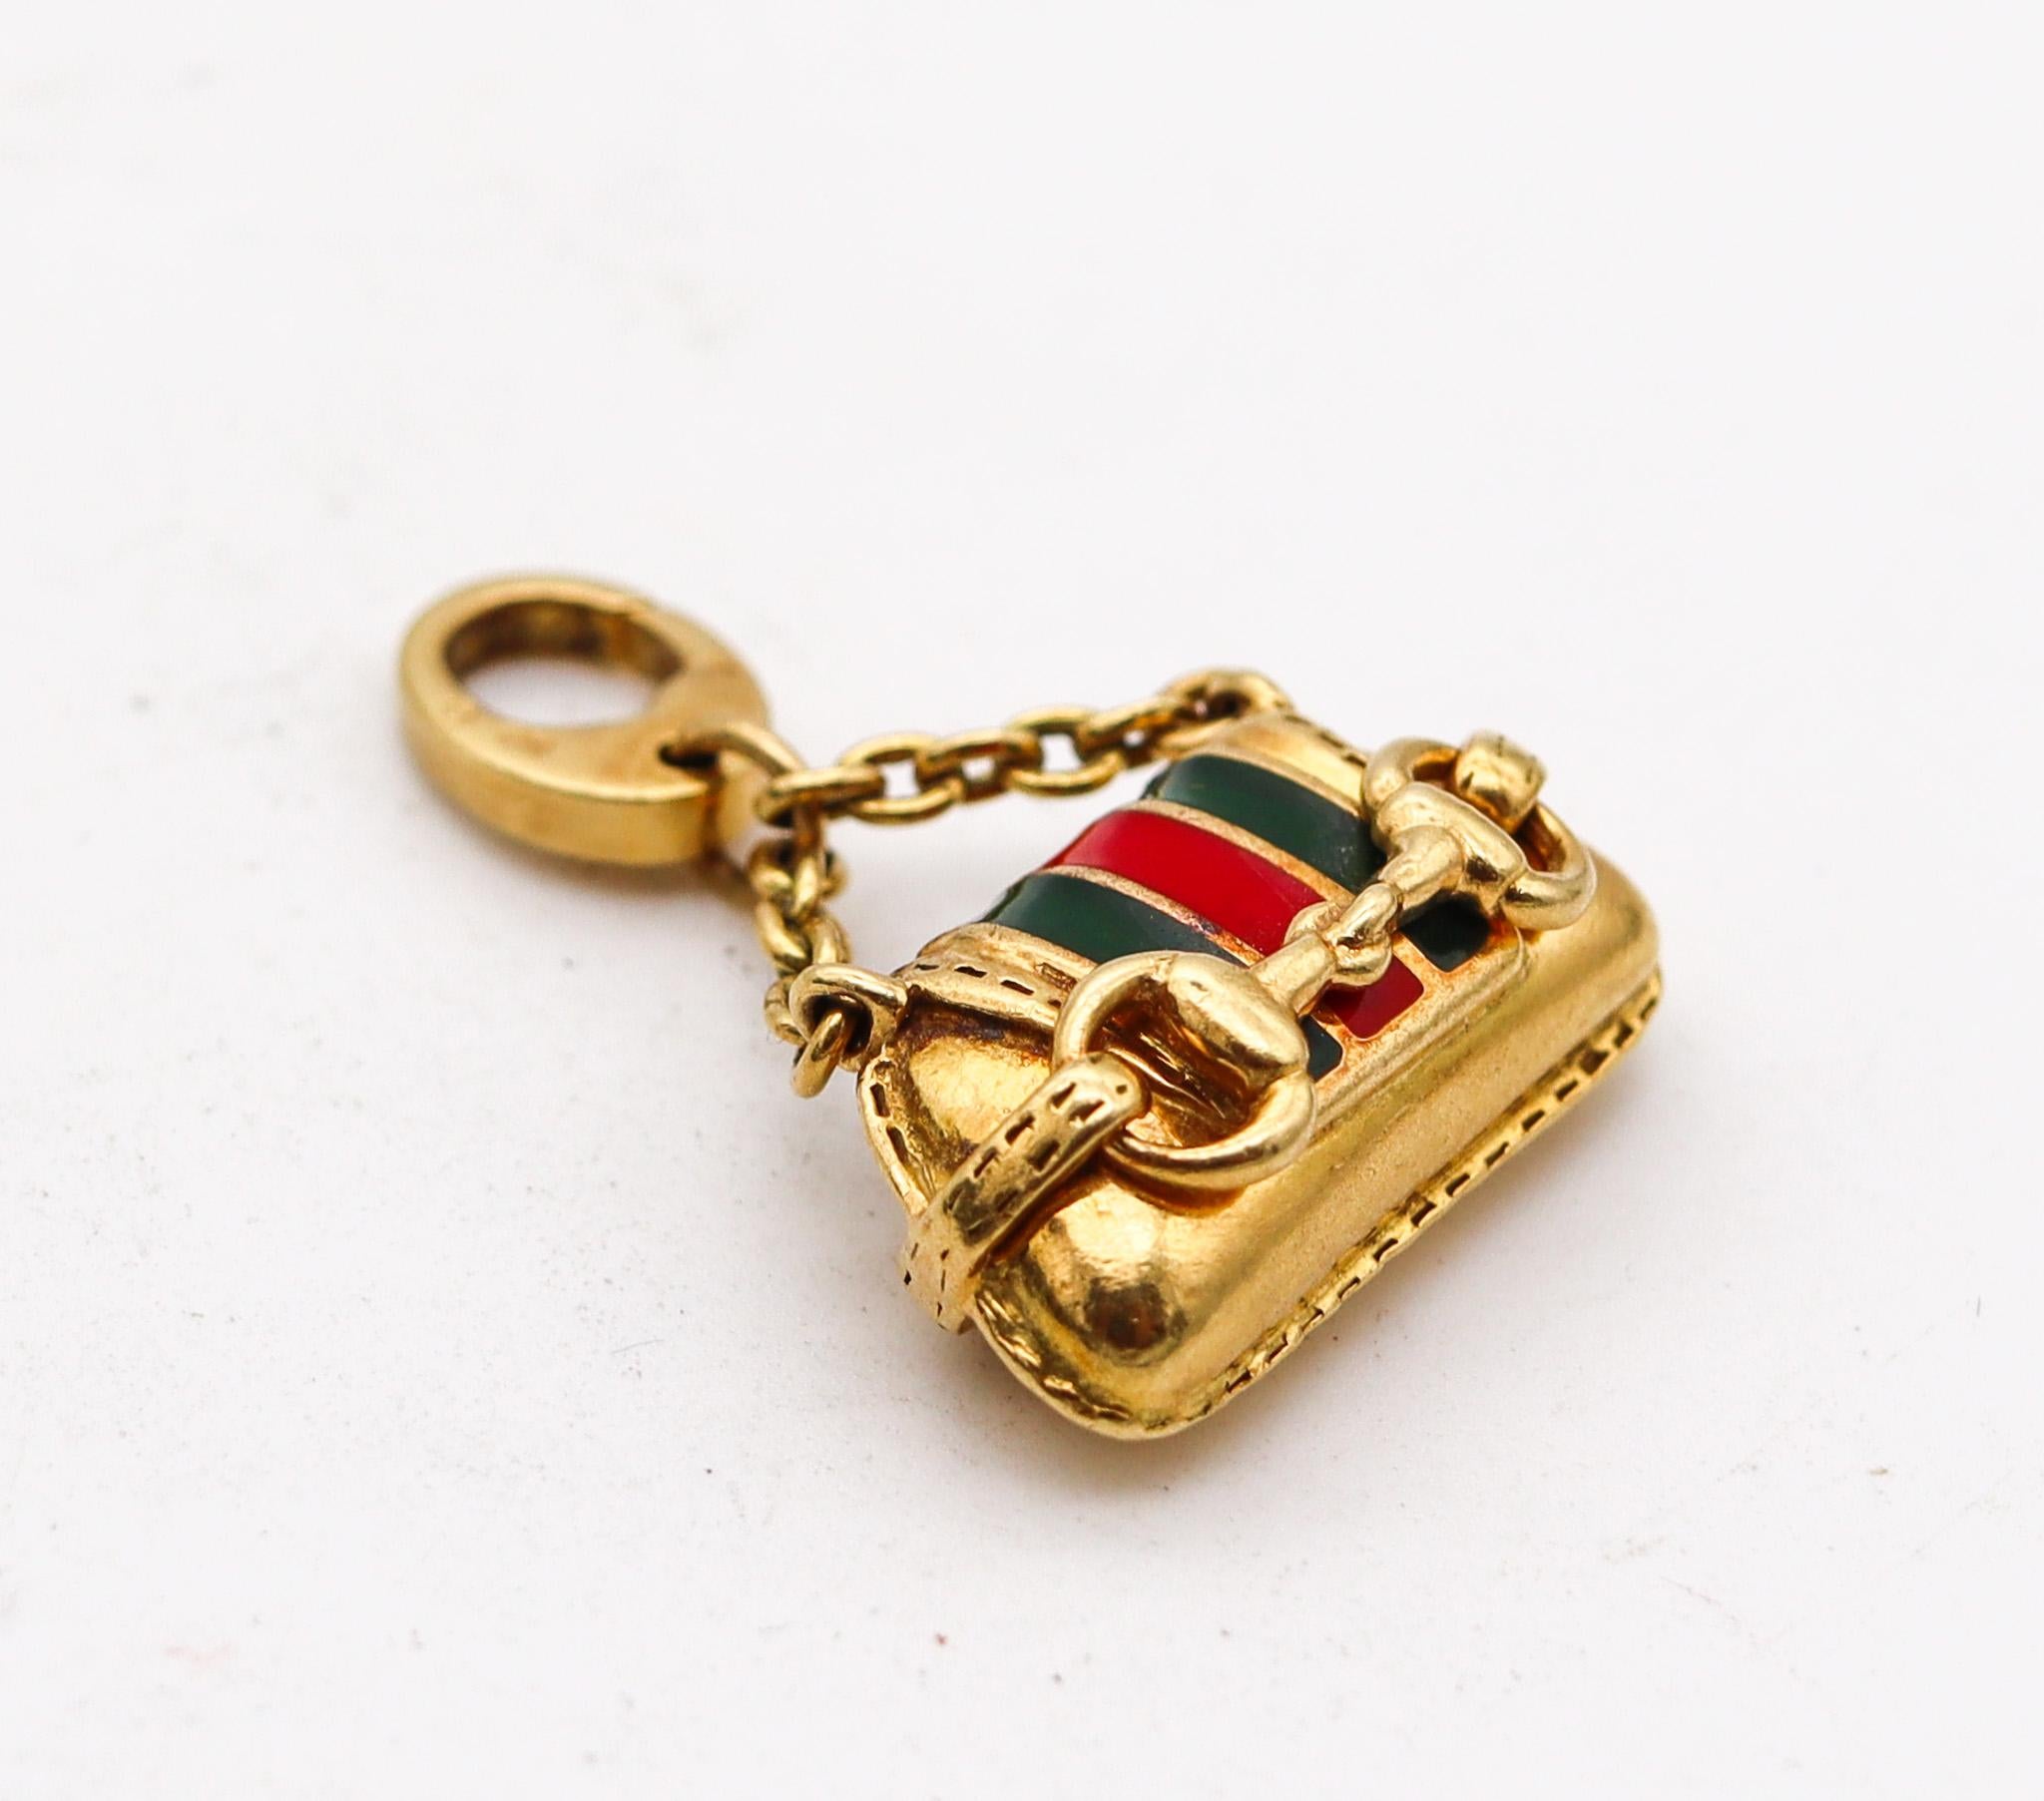 Bag charm pendant designed by Gucci.

Beautiful vintage pendant charm created in Firenze Italy, by the luxury house of Gucci. This pendant has been crafted in the shape of the iconic bag with horsebit design in solid yellow gold of 18 karats with